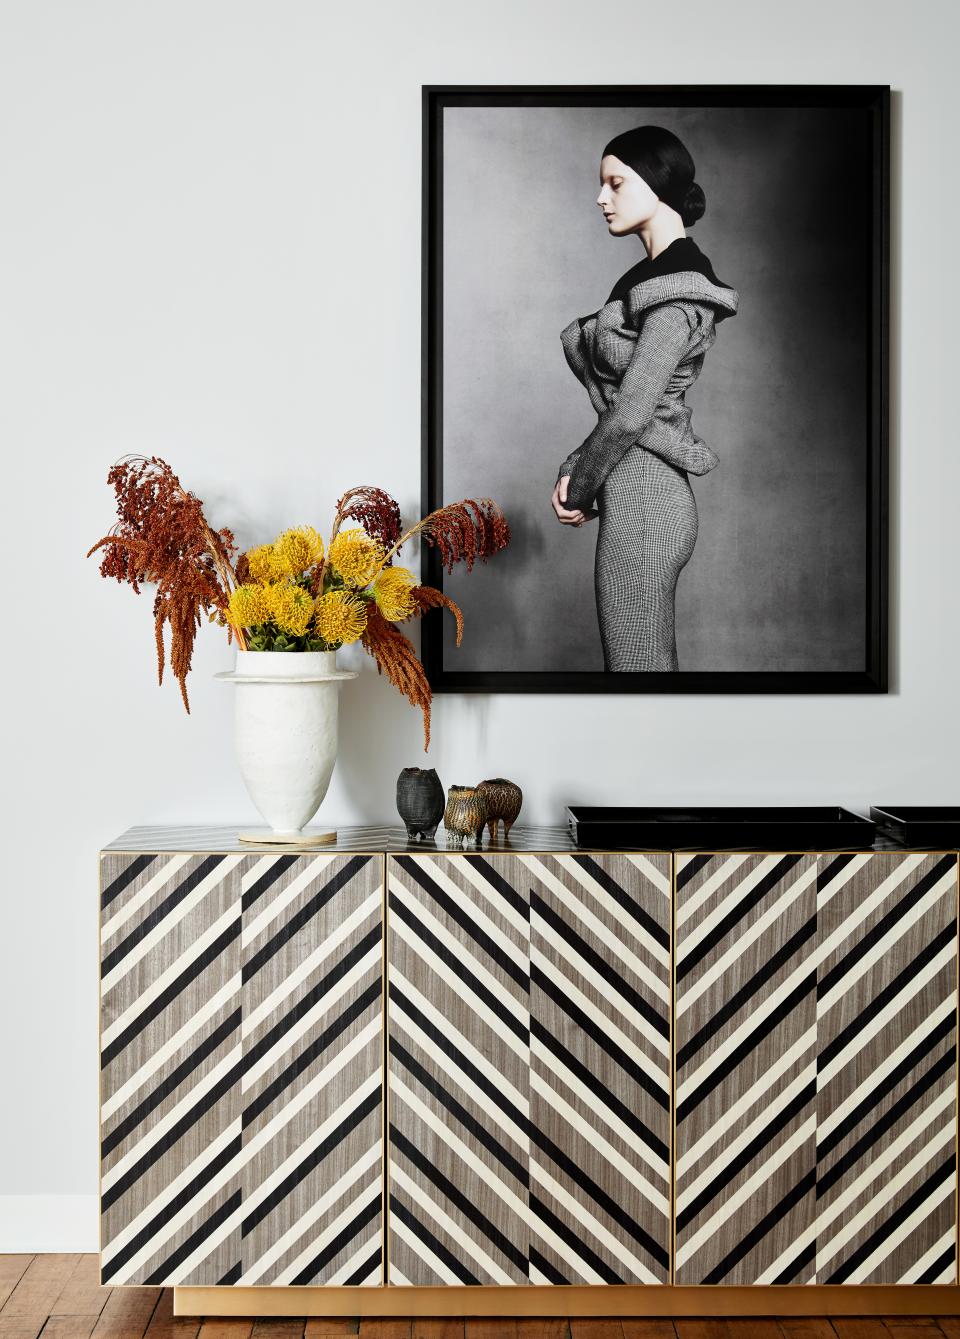 The black-and-white Rima cabinet features a graphic pattern made with technical precision. The marriage of design and craft is central to DeMuro Das's ethos—and something the brand sees reflected in its new surroundings. "It's a lot of people actually <em>making,</em> because the spaces lend themselves to that," Lee says of her Industry City neighbors. "It's a combination of people making and showing."